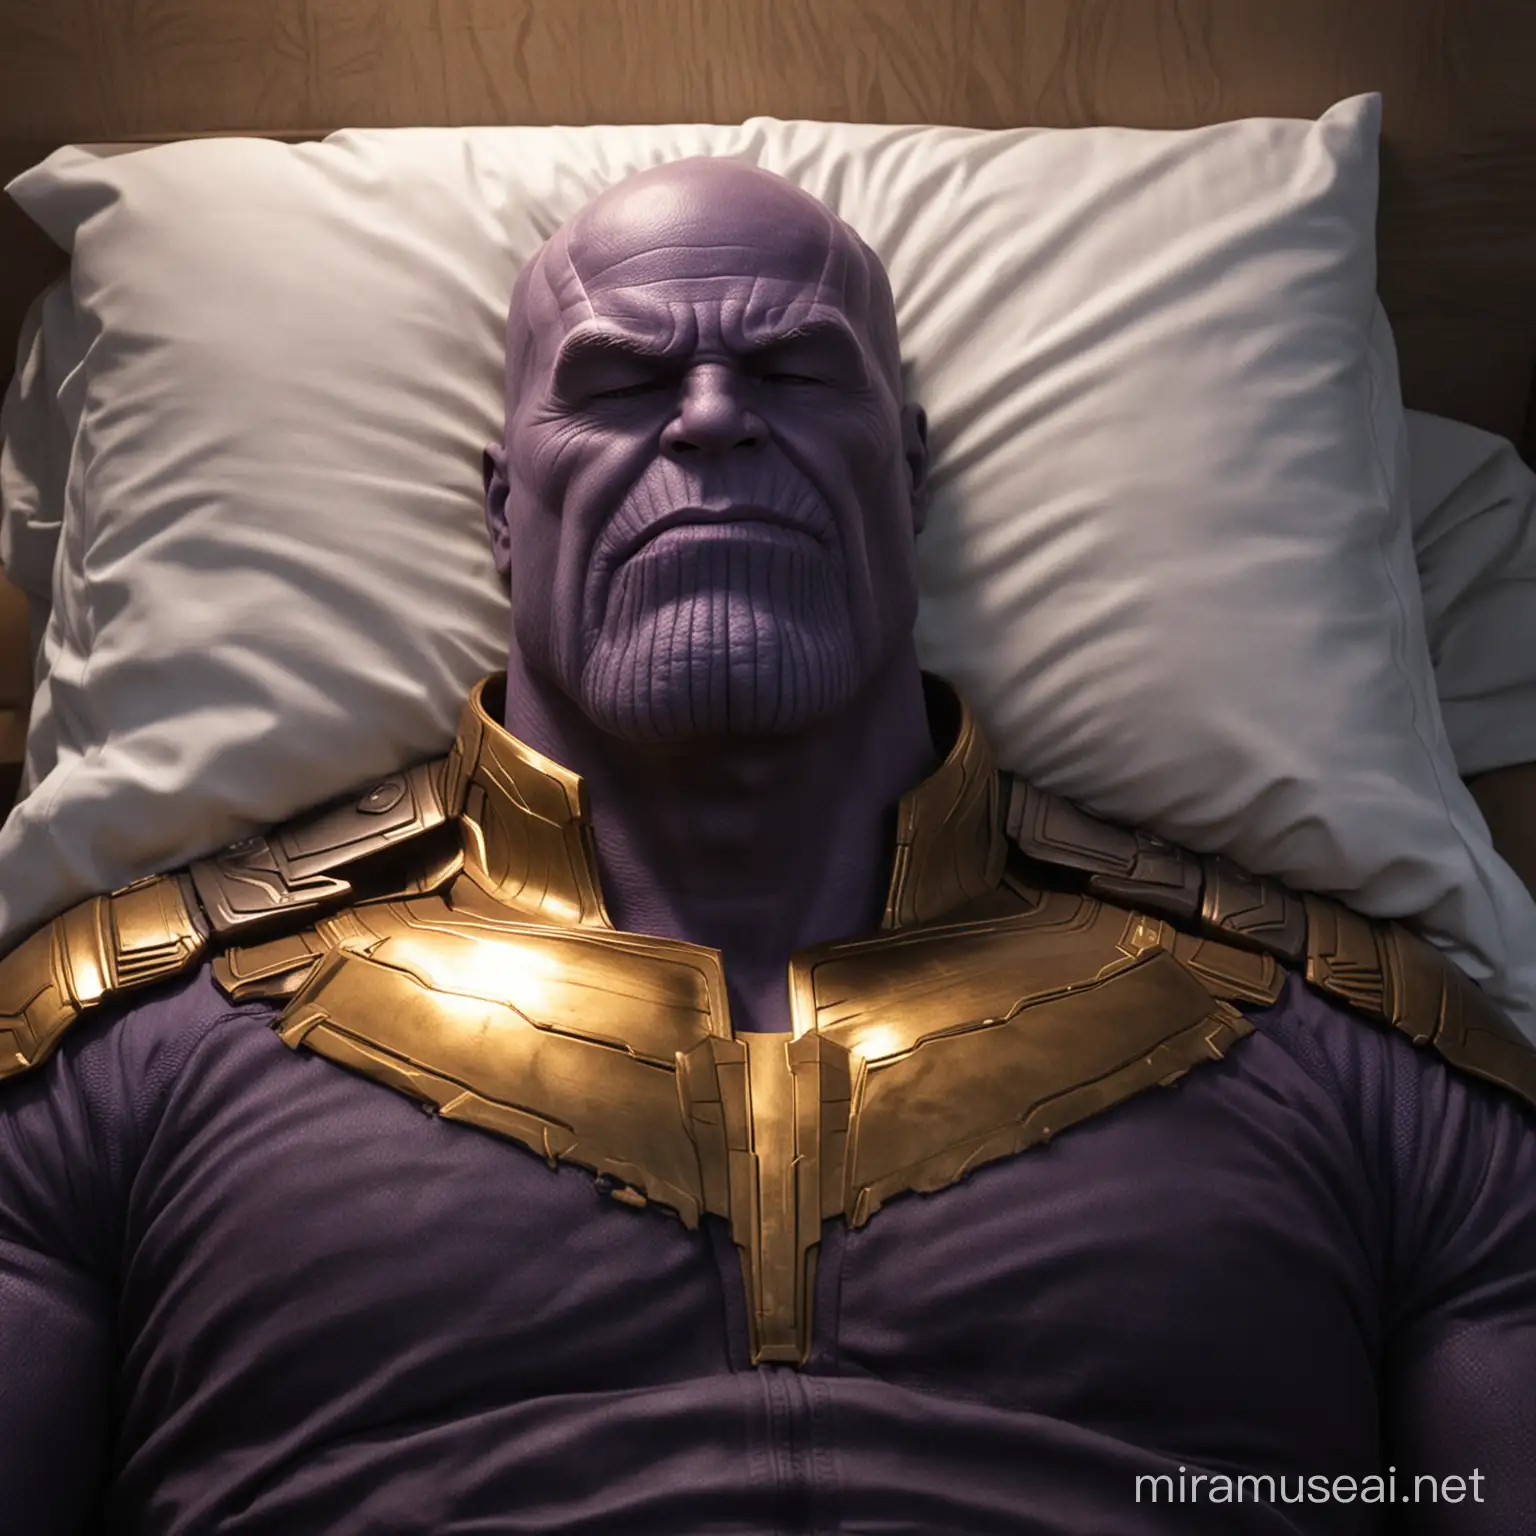 Thanos Sleeping Peacefully in His Cosmic Sanctuary